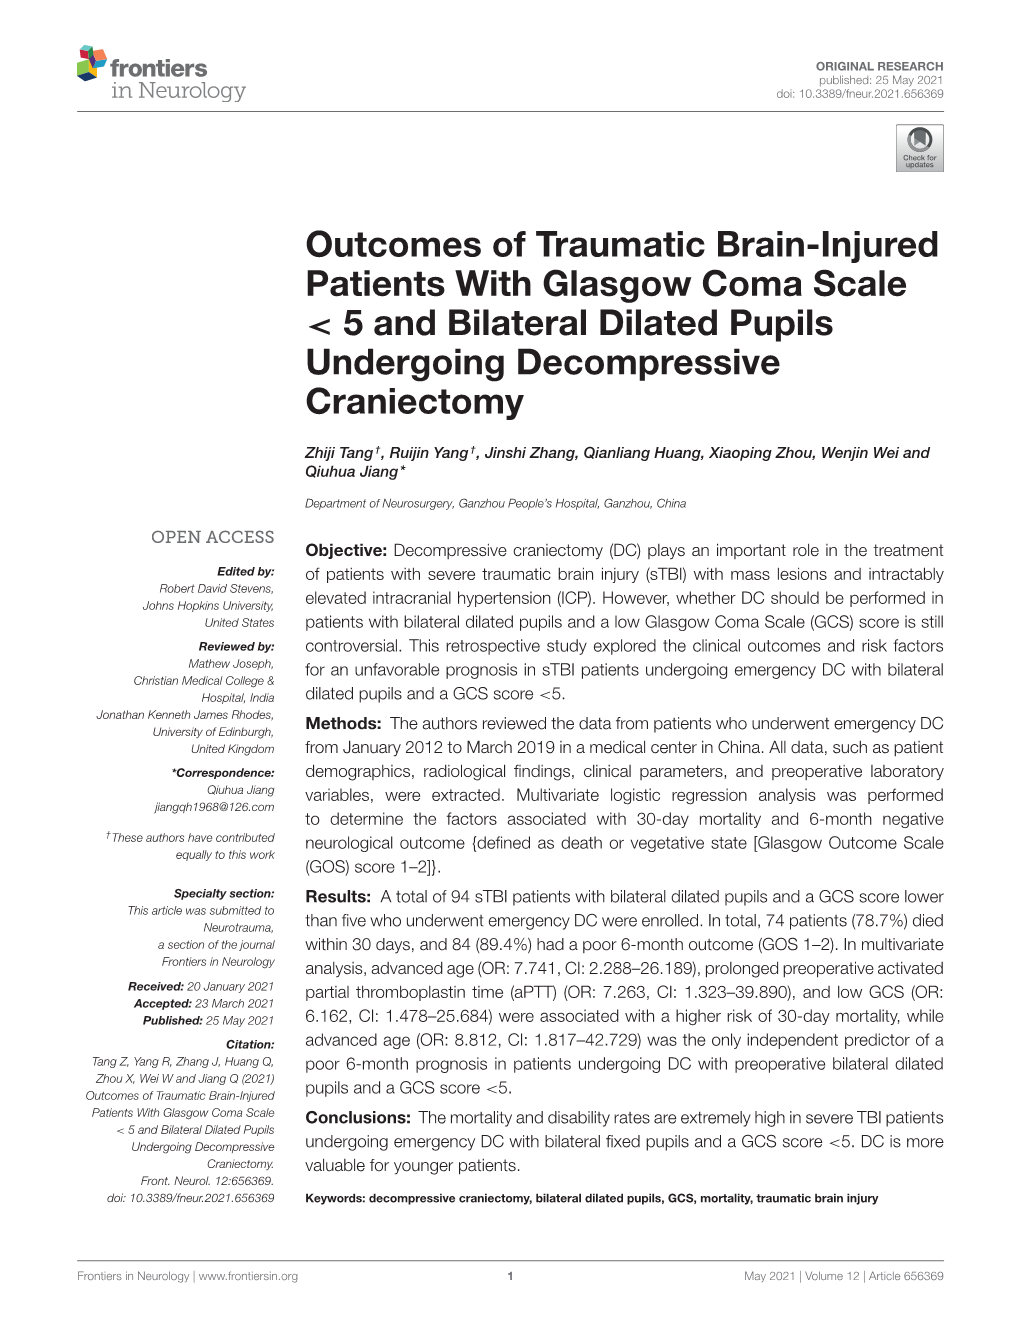 Outcomes of Traumatic Brain-Injured Patients with Glasgow Coma Scale